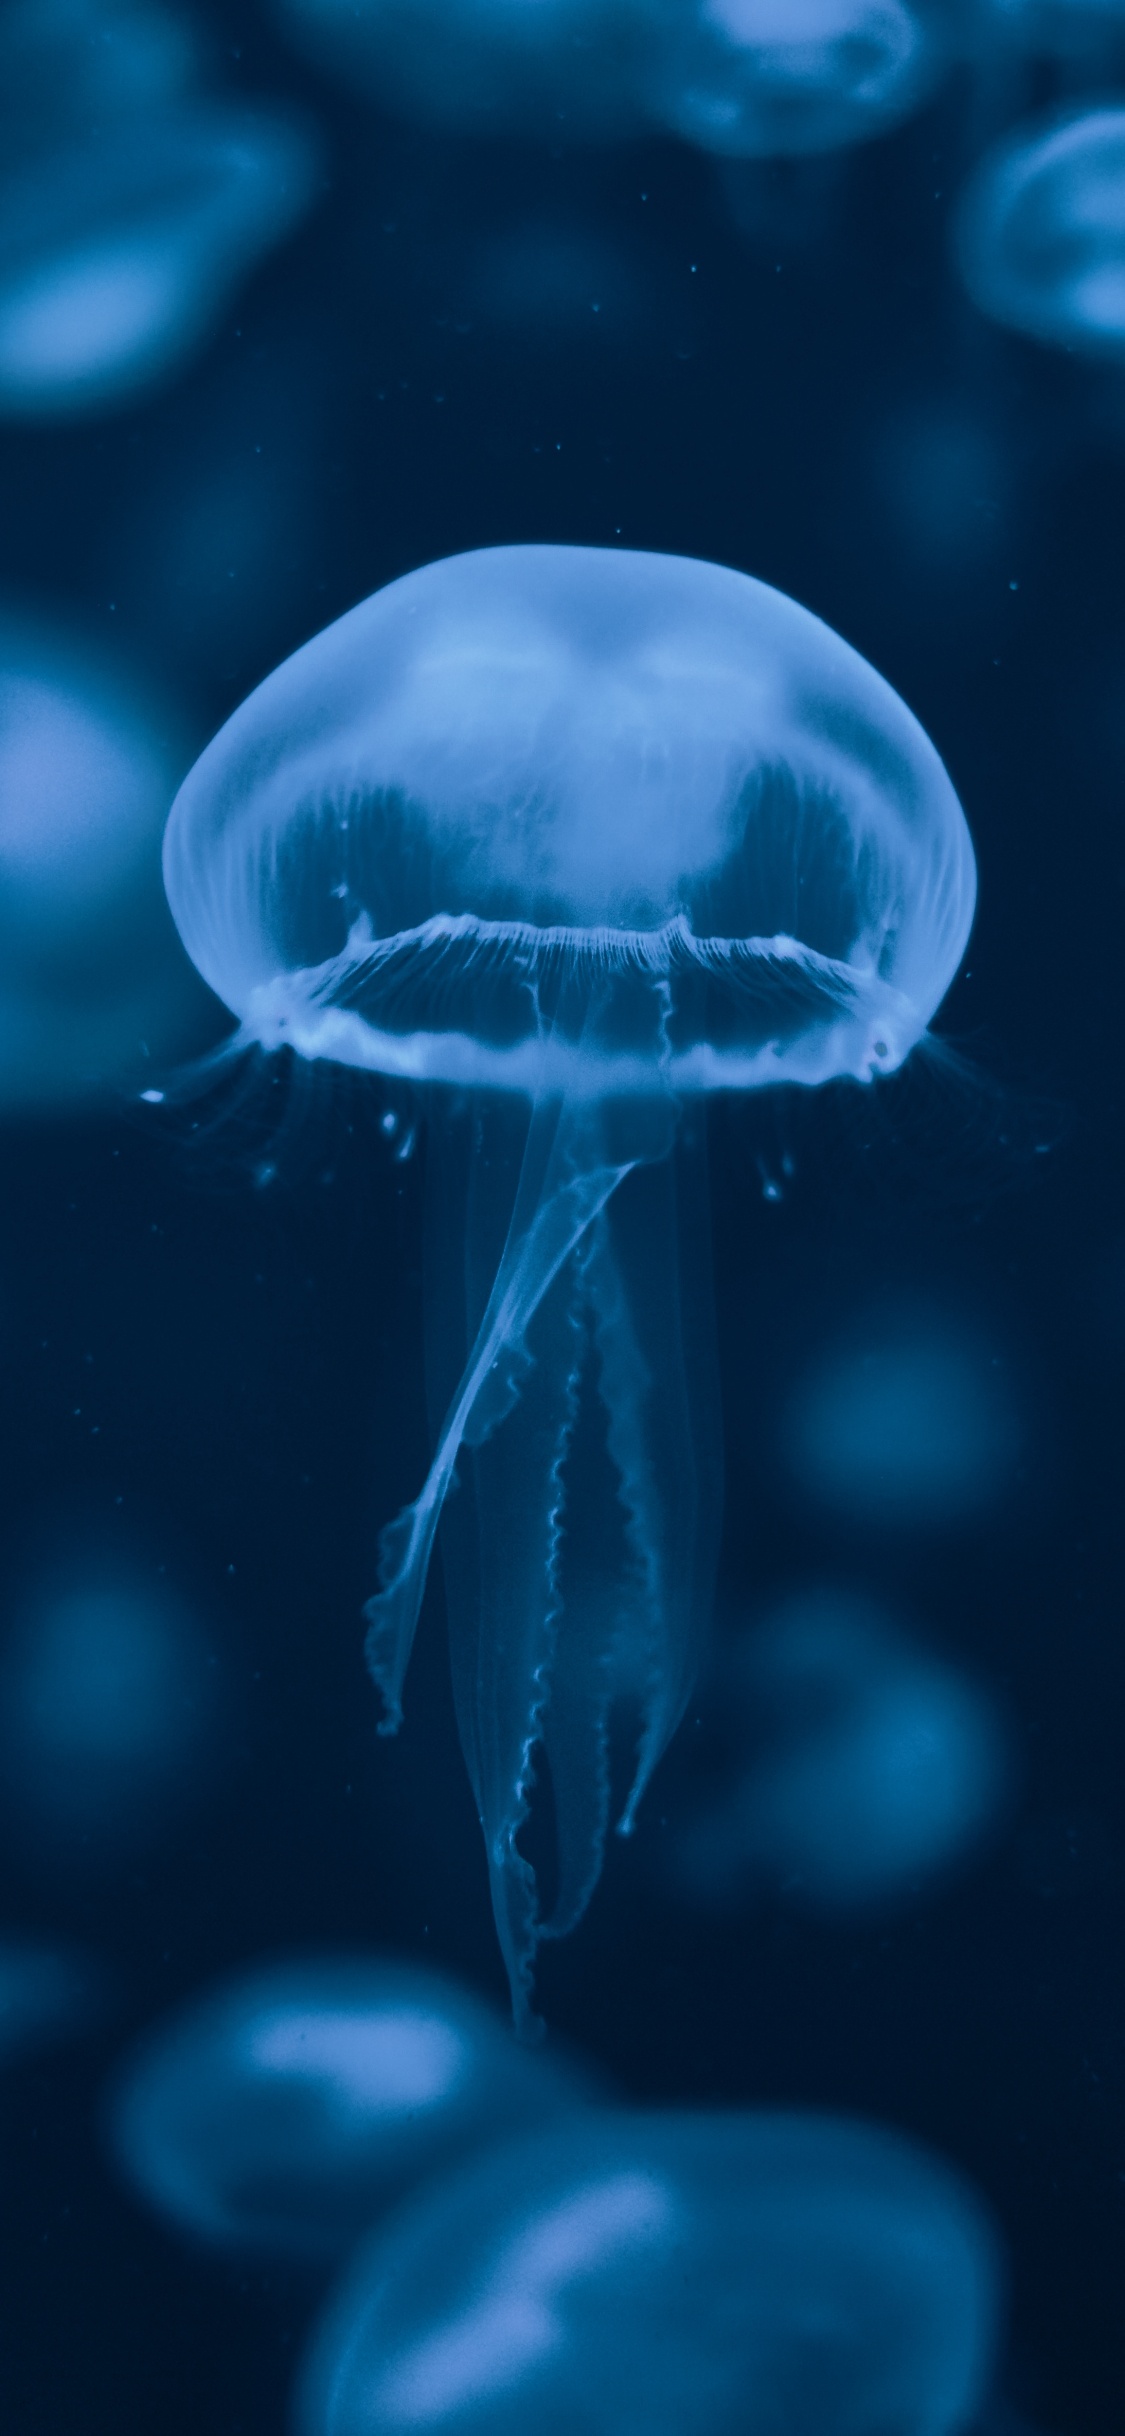 Blue and White Jellyfish Illustration. Wallpaper in 1125x2436 Resolution